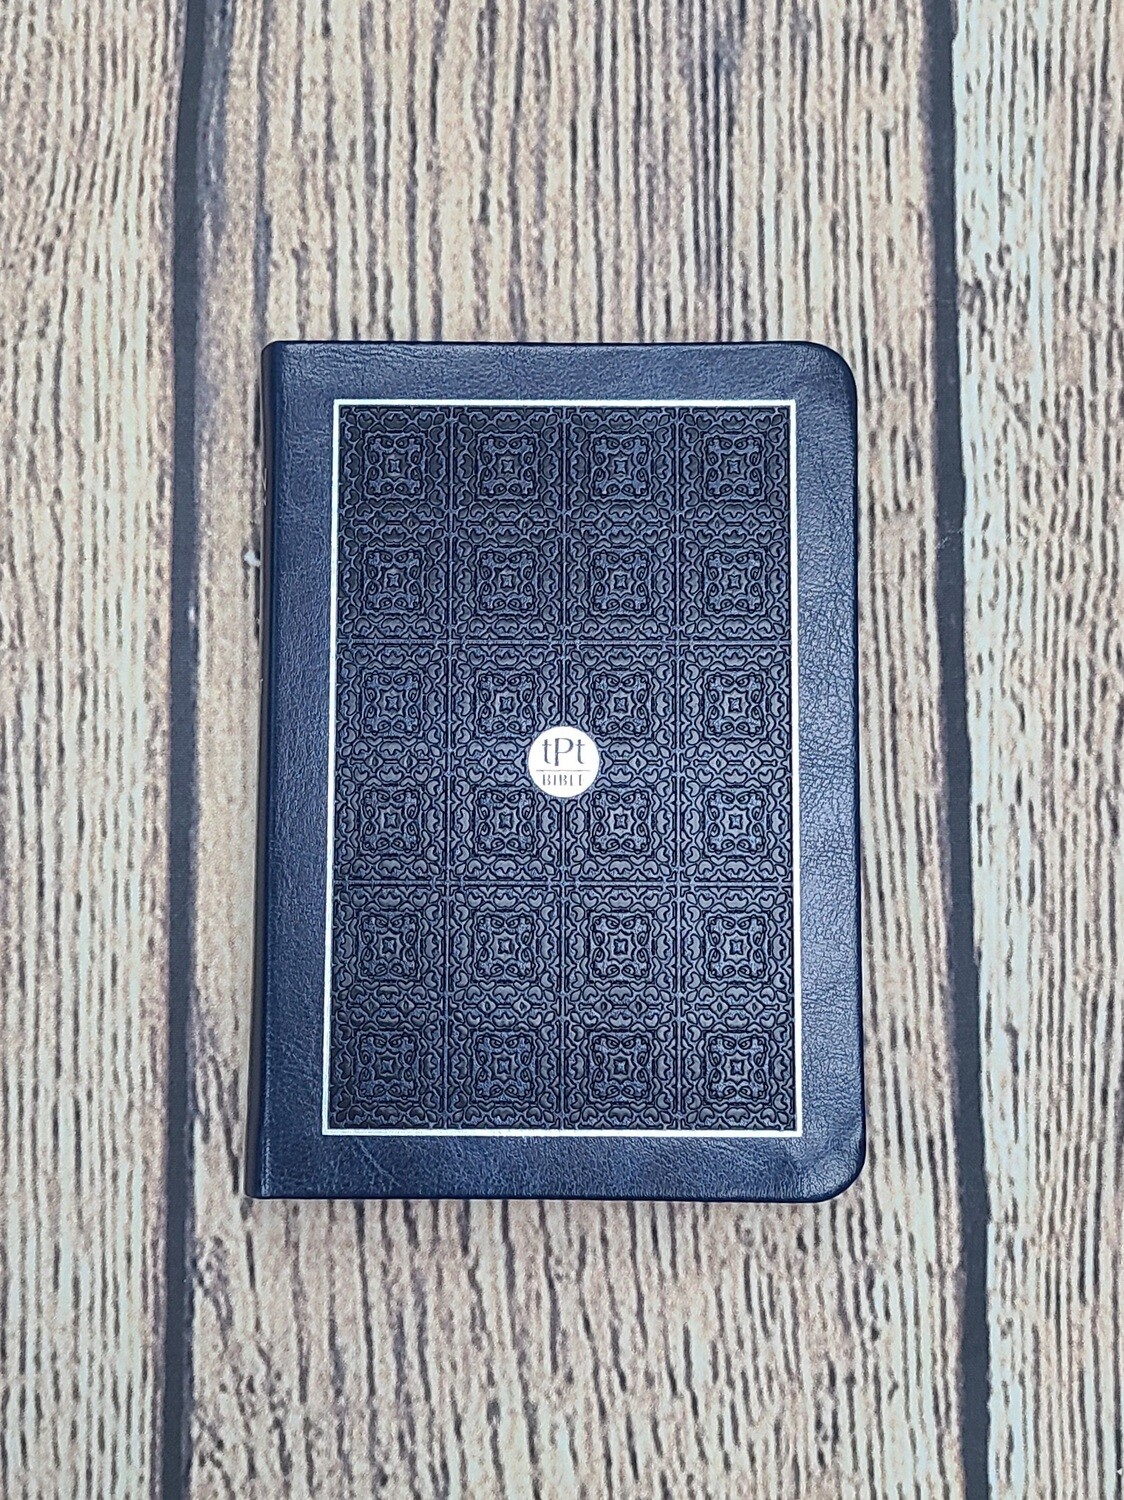 The Passion Translation - New Testament - Compact Edition: Navy Leather